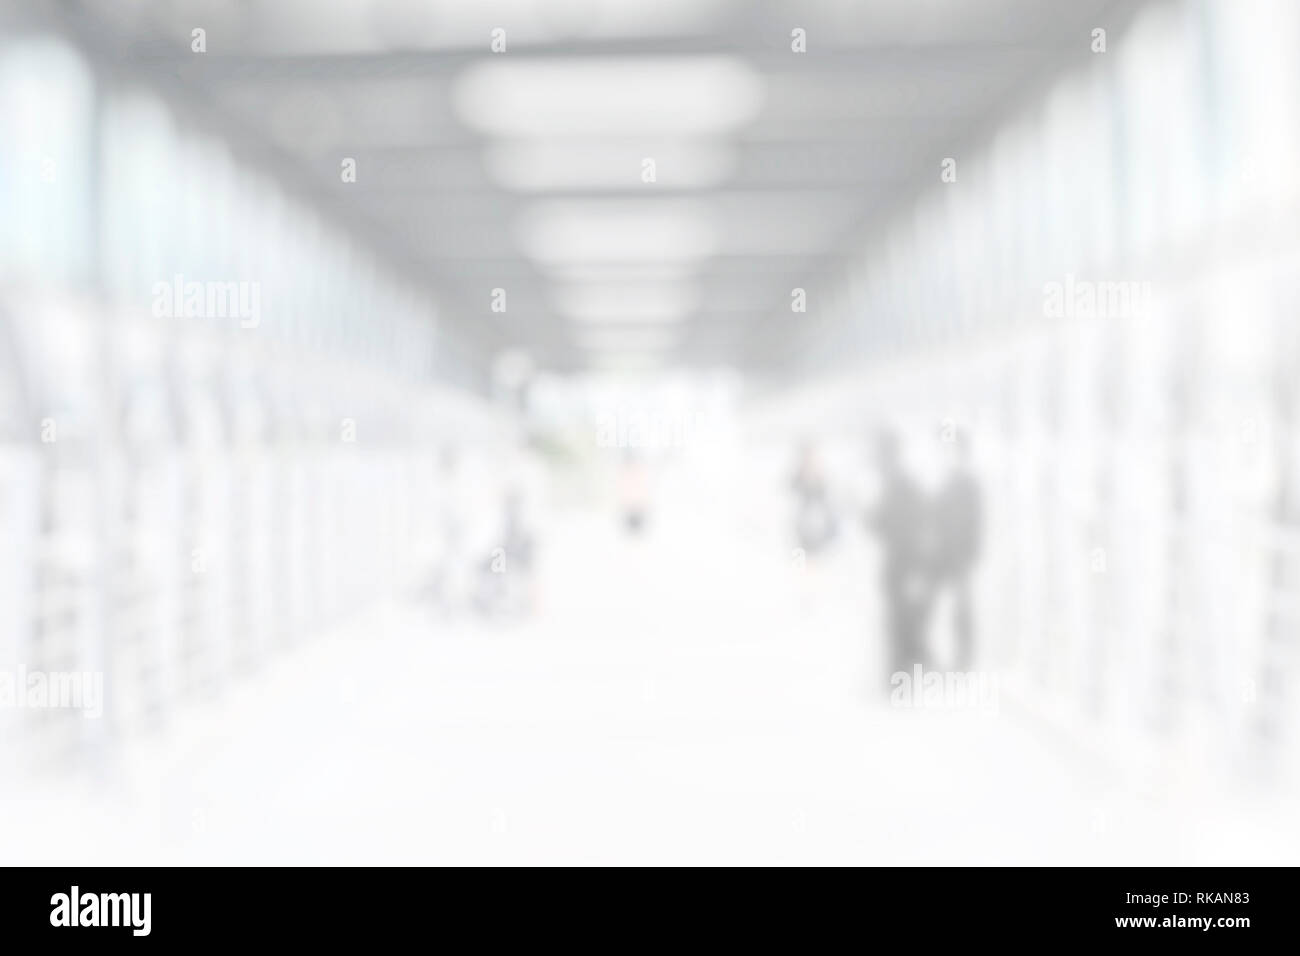 Blurred pathway Abstract white grey background for backdrop design, composition for , website, magazine or graphic for commercial campaign design Stock Photo